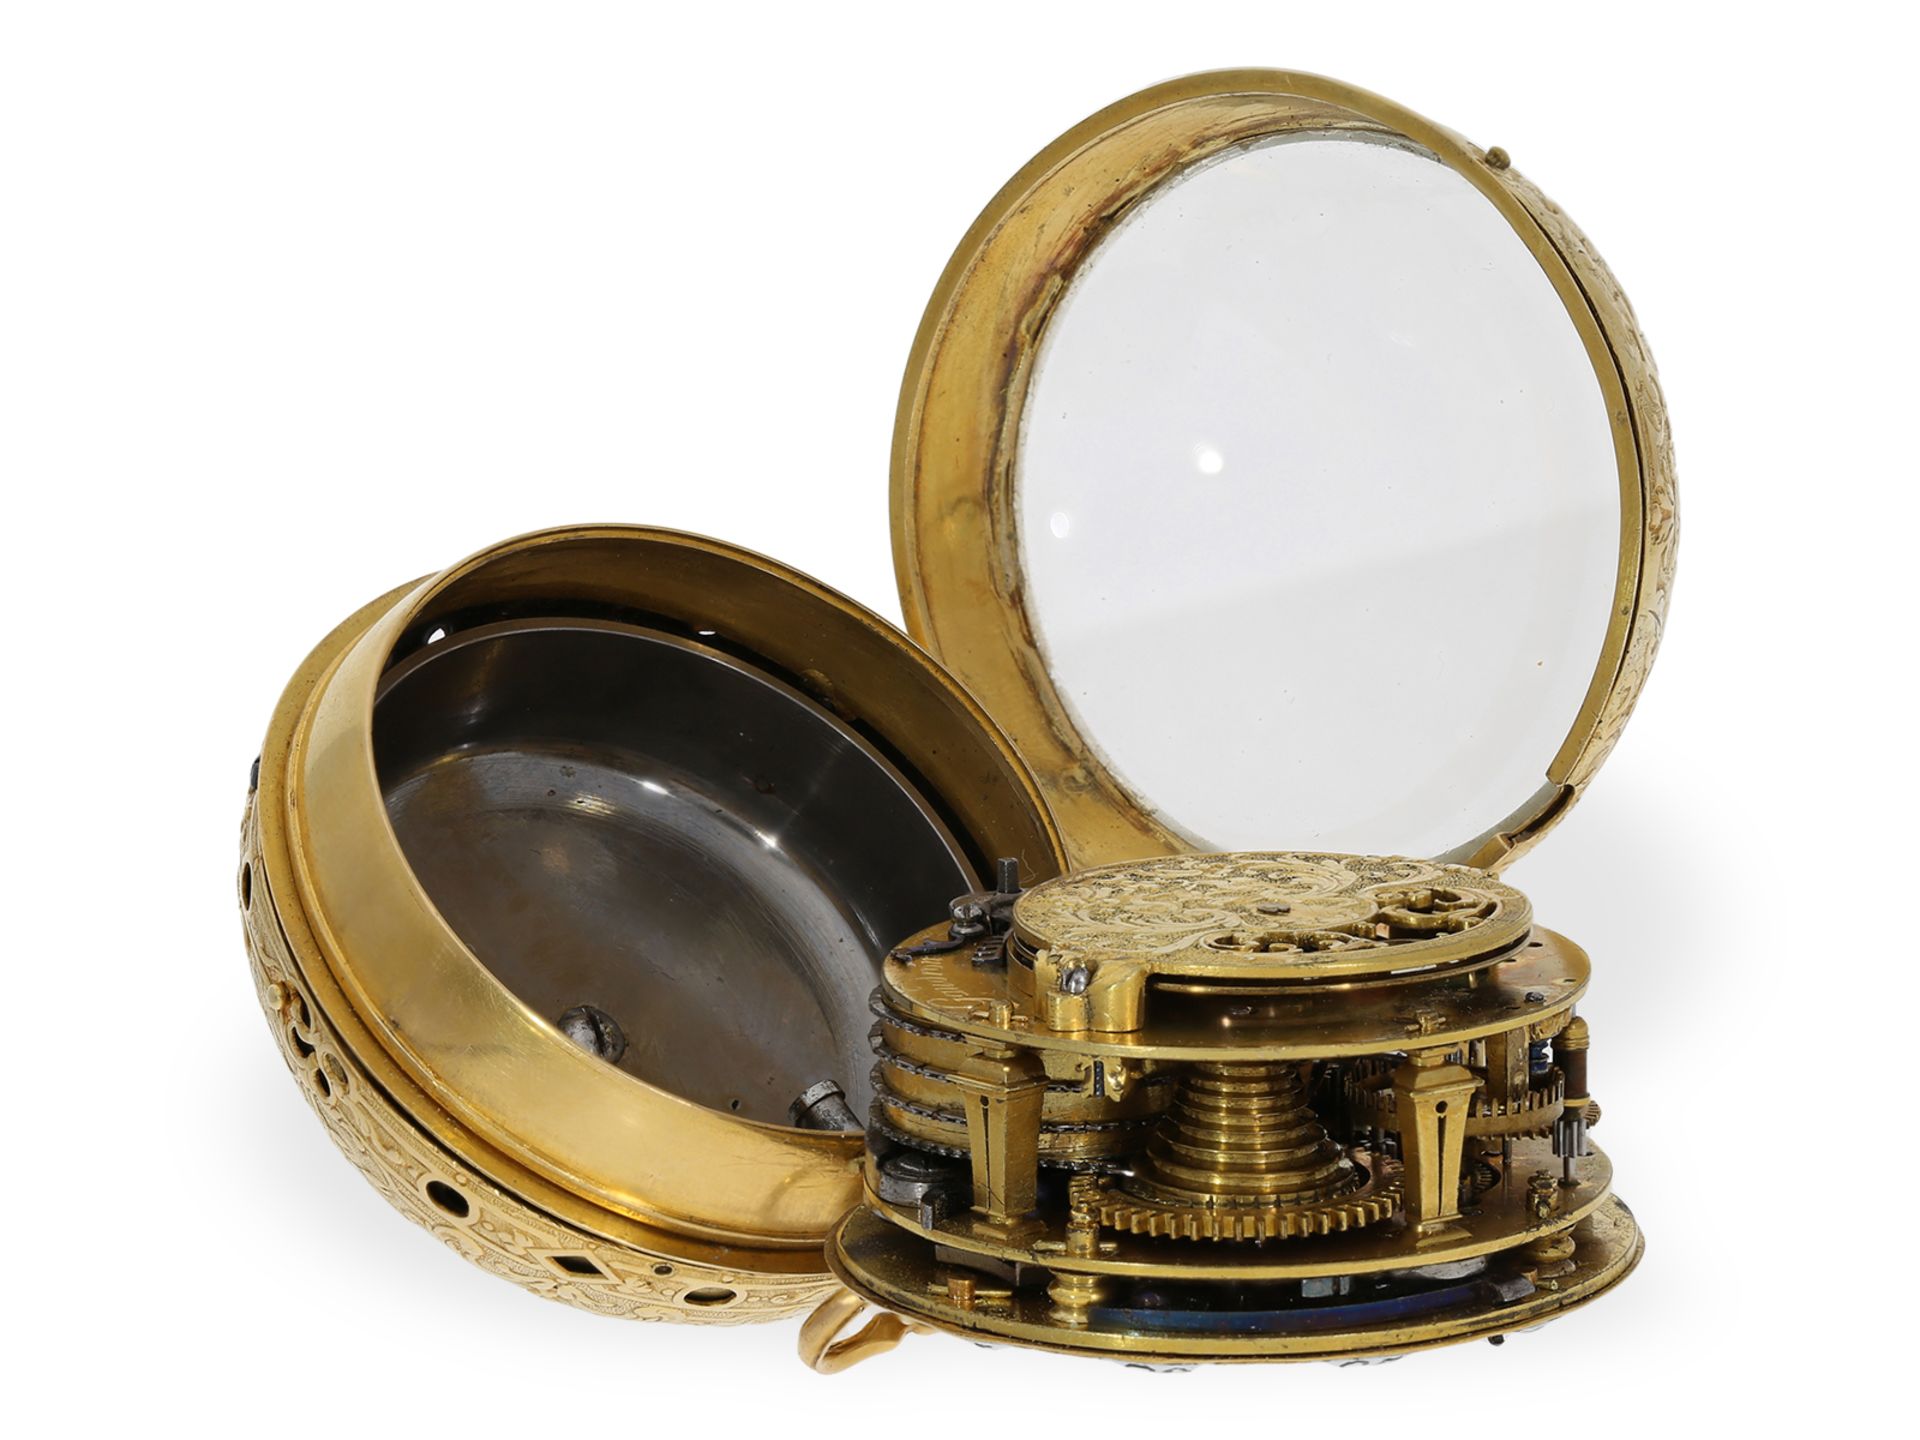 Pocket watch: rarity, gold Oignon with repeater, royal watchmaker Gaudron ca. 1710 - Image 2 of 4